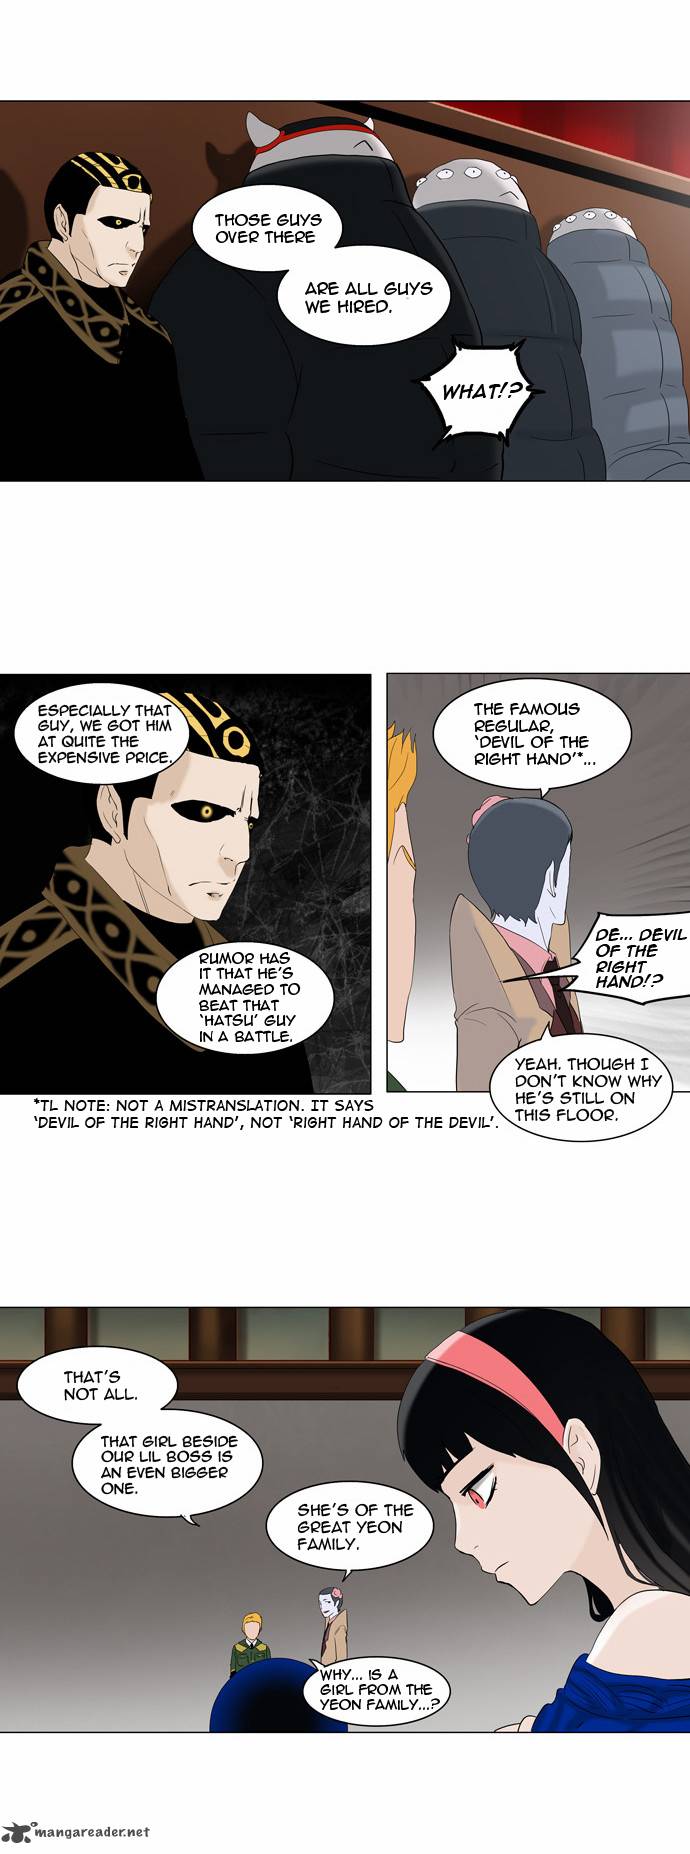 Tower Of God 86 7